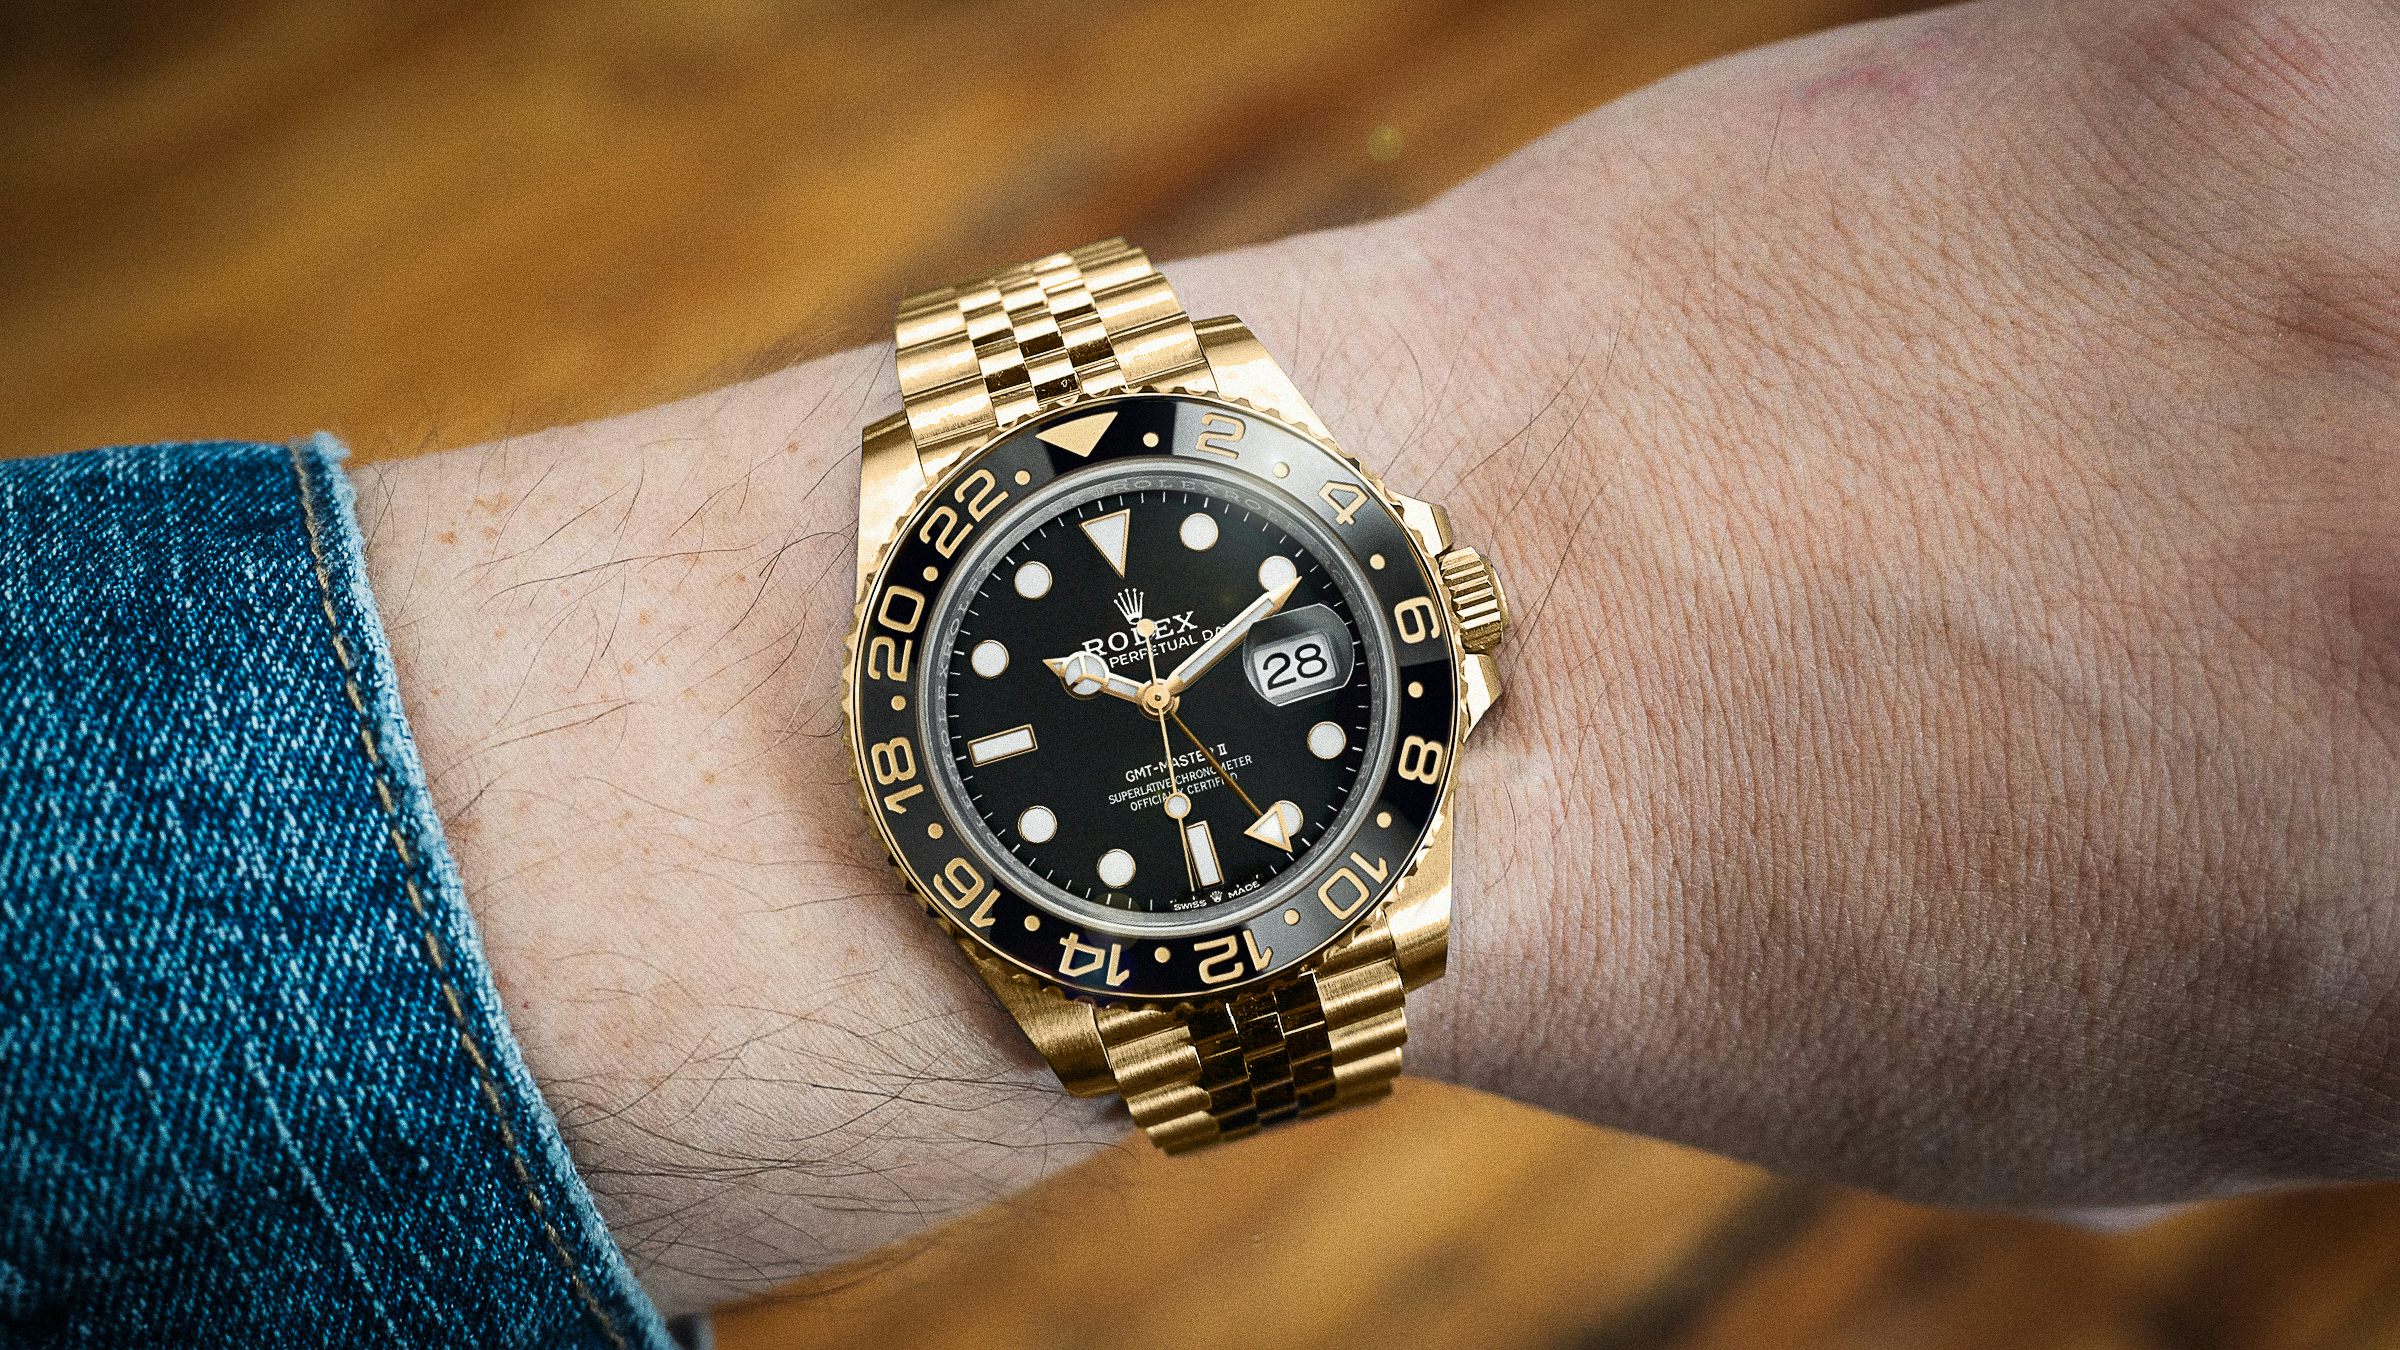 Hodinkee's 2023 Rolex Predictions For Watches & Wonders